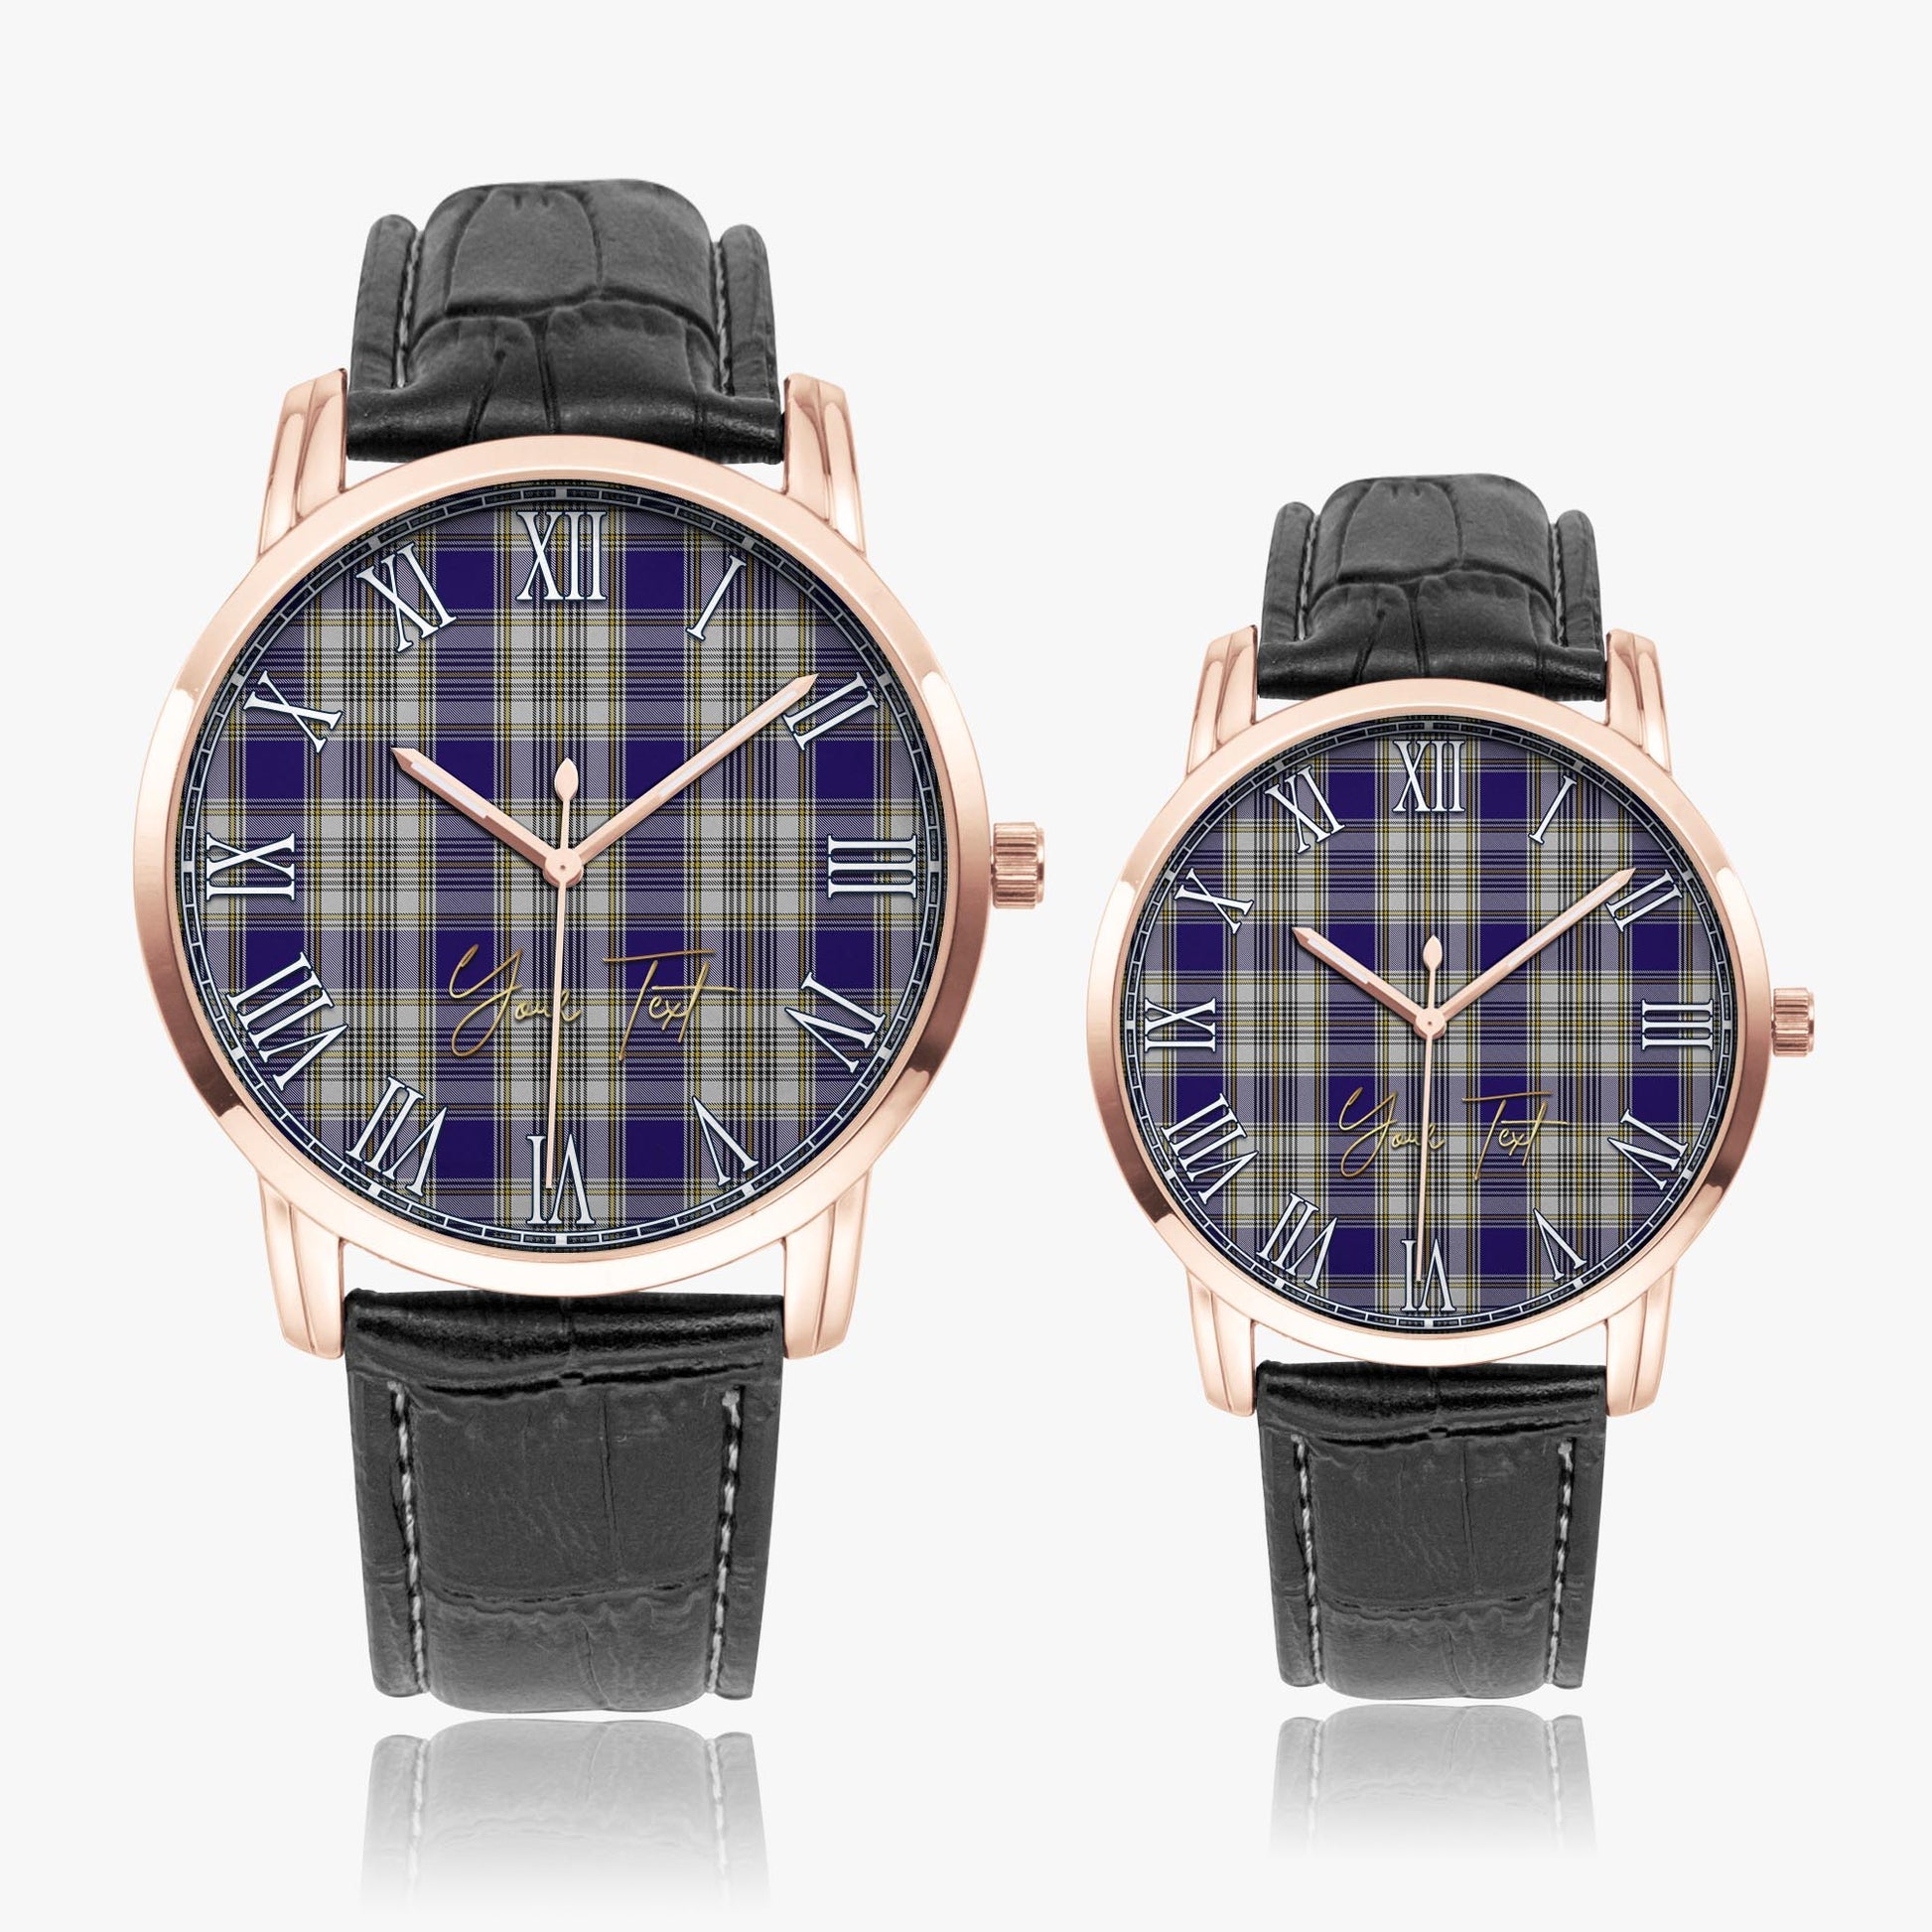 Livingston Dress Tartan Personalized Your Text Leather Trap Quartz Watch Wide Type Rose Gold Case With Black Leather Strap - Tartanvibesclothing